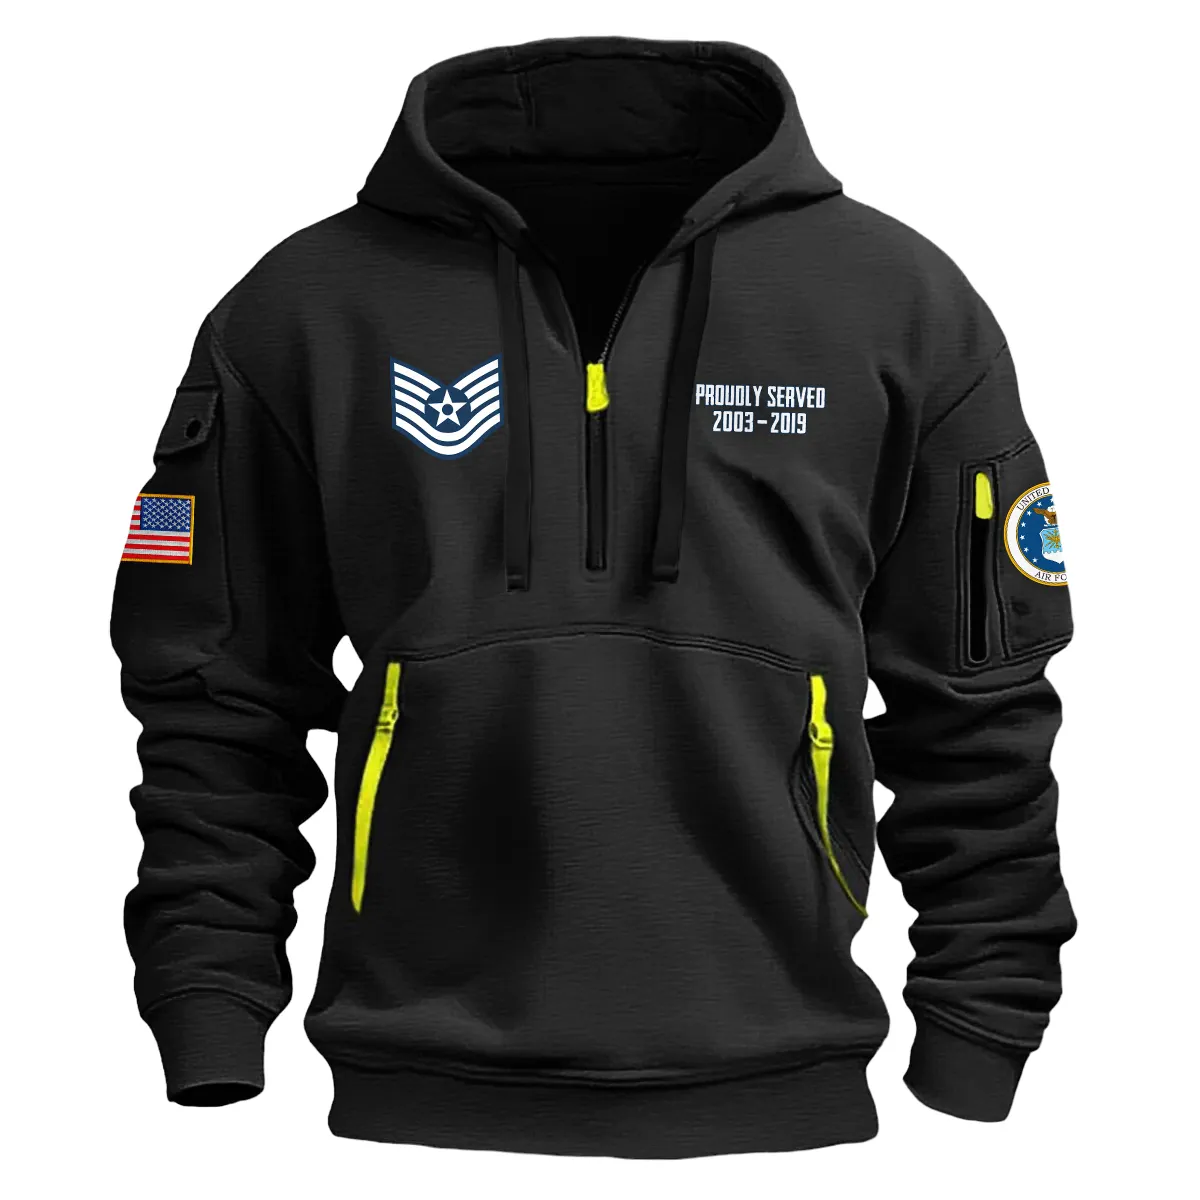 US Military All Branches! Personalized Gift E7A-MSGT U.S. Air Force Fashion Hoodie Half Zipper